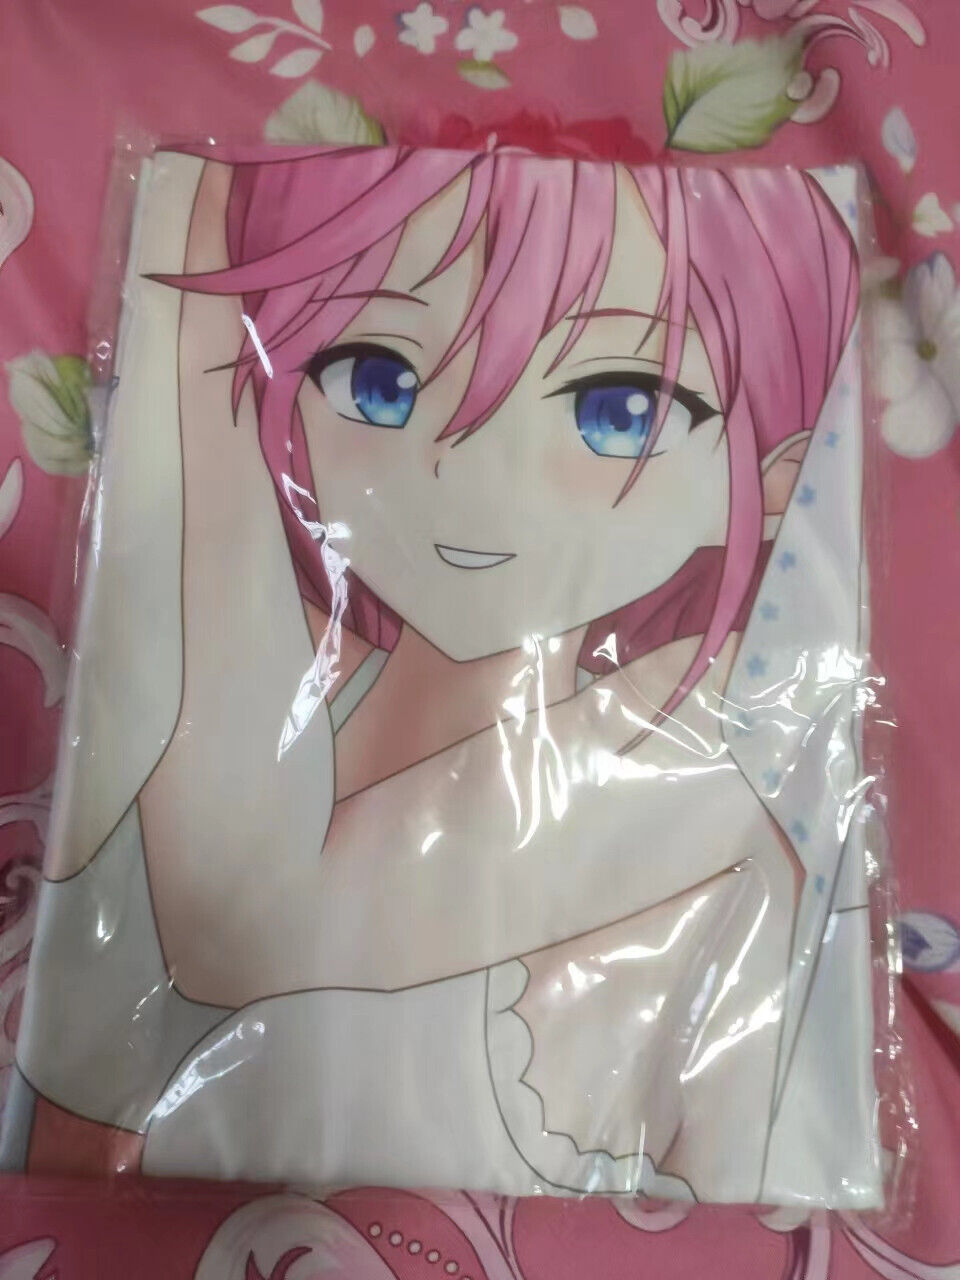 Awesome 150cm The Quintessential Quintuplets Nakano Ichika Anime Body Pillow Cover Case on eBay